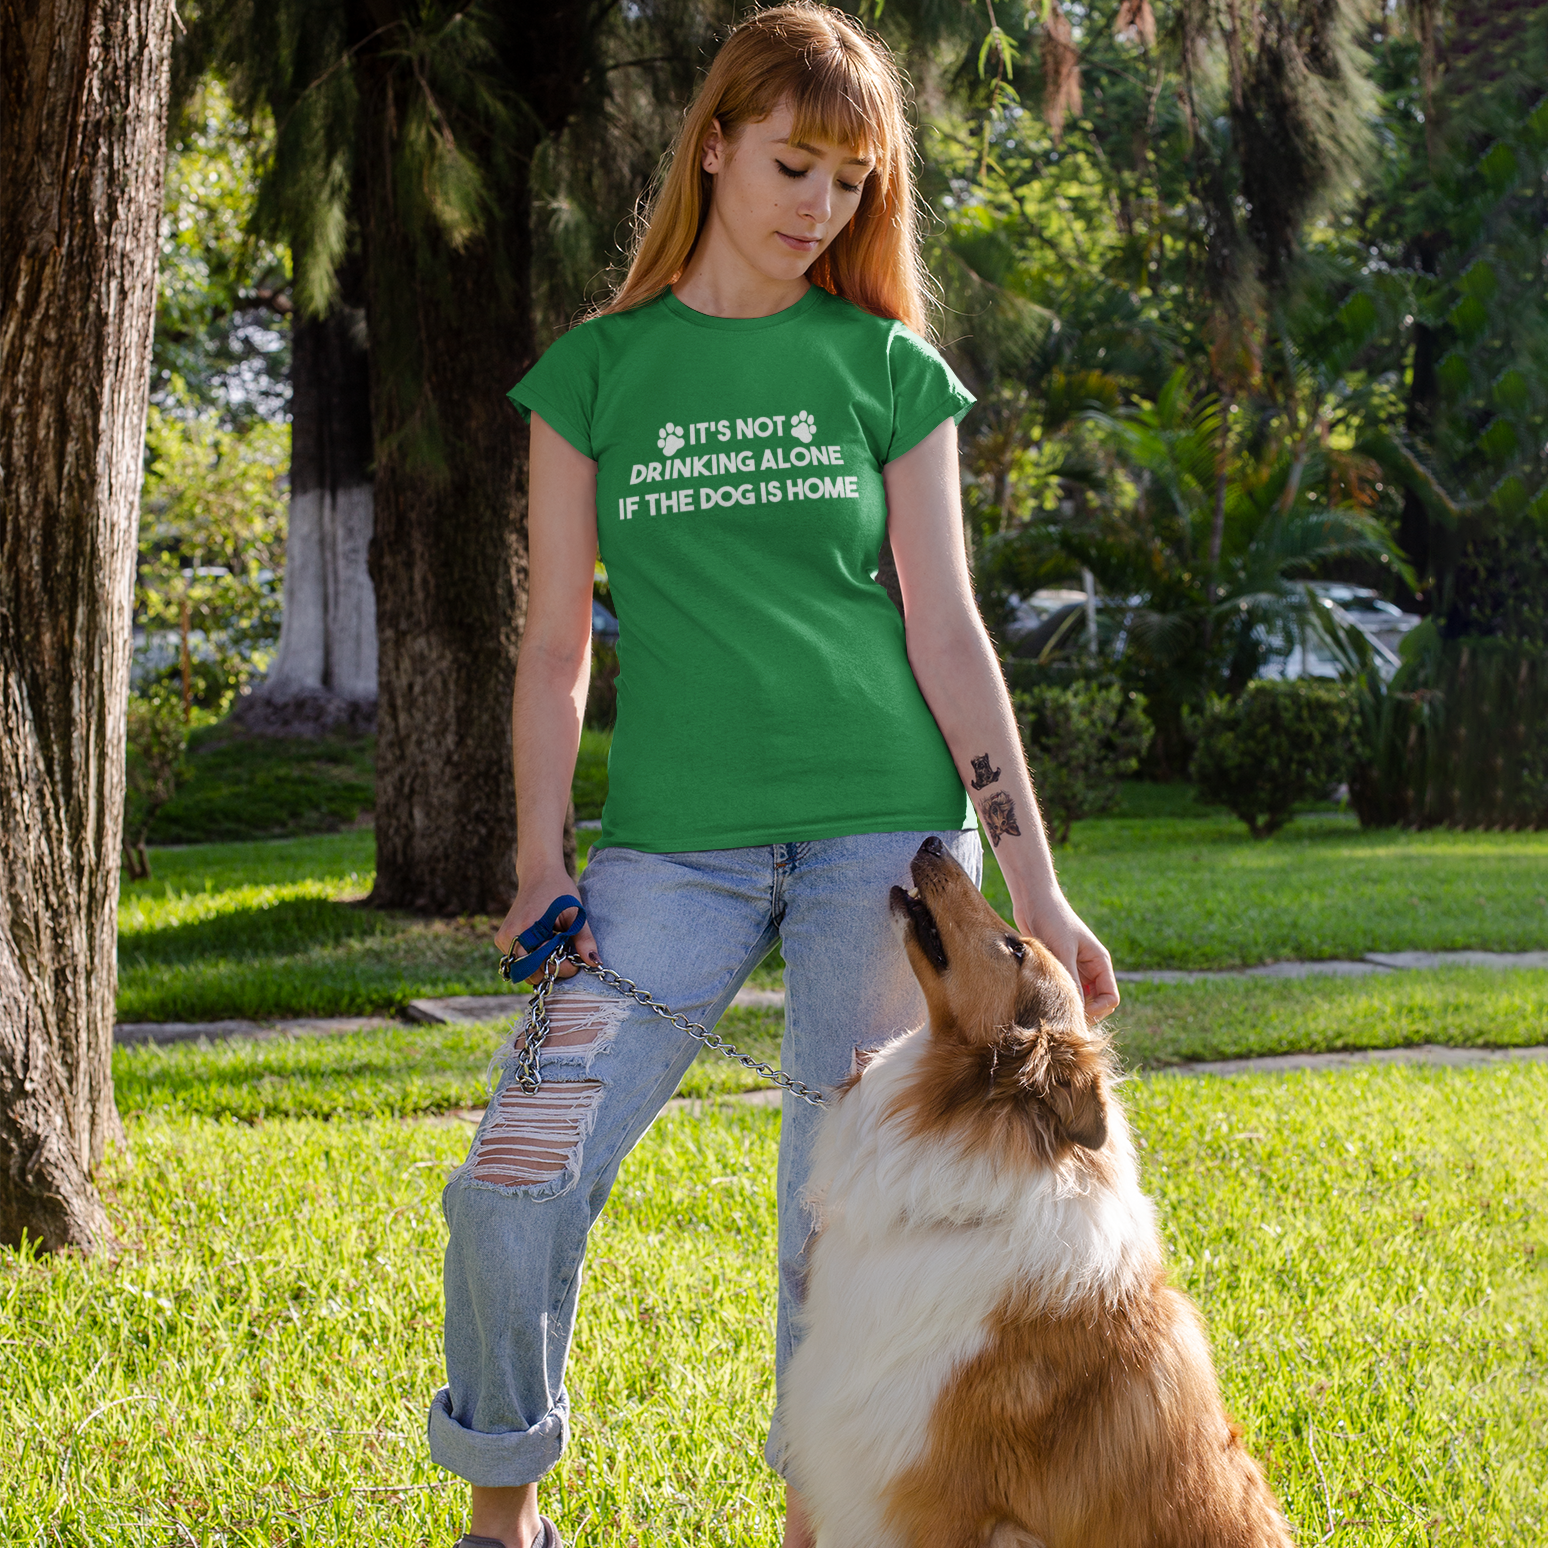 'It's not drinking alone if the dog is home' volwassene shirt